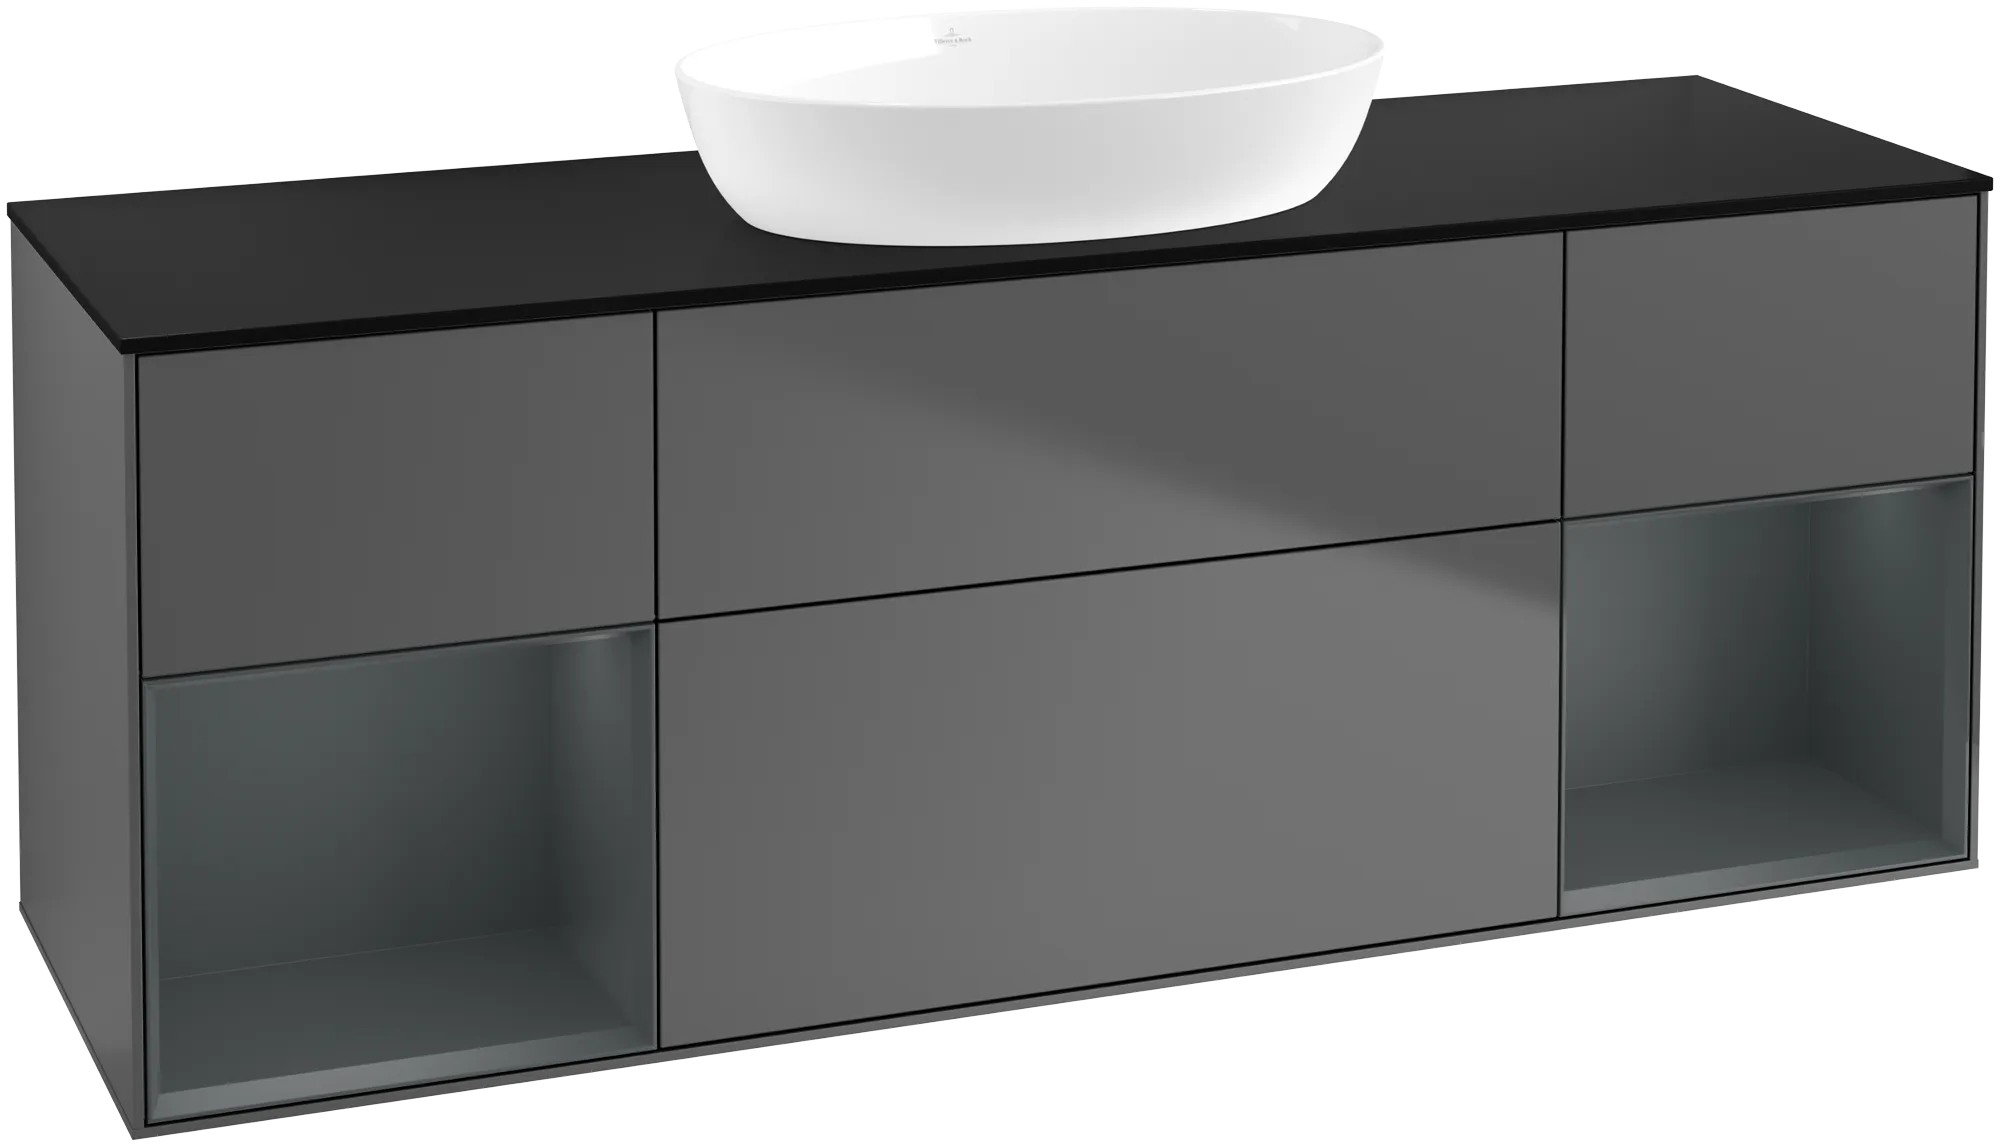 Picture of VILLEROY BOCH Finion Vanity unit, with lighting, 4 pull-out compartments, 1600 x 603 x 501 mm, Anthracite Matt Lacquer / Midnight Blue Matt Lacquer / Glass Black Matt #GD02HGGK